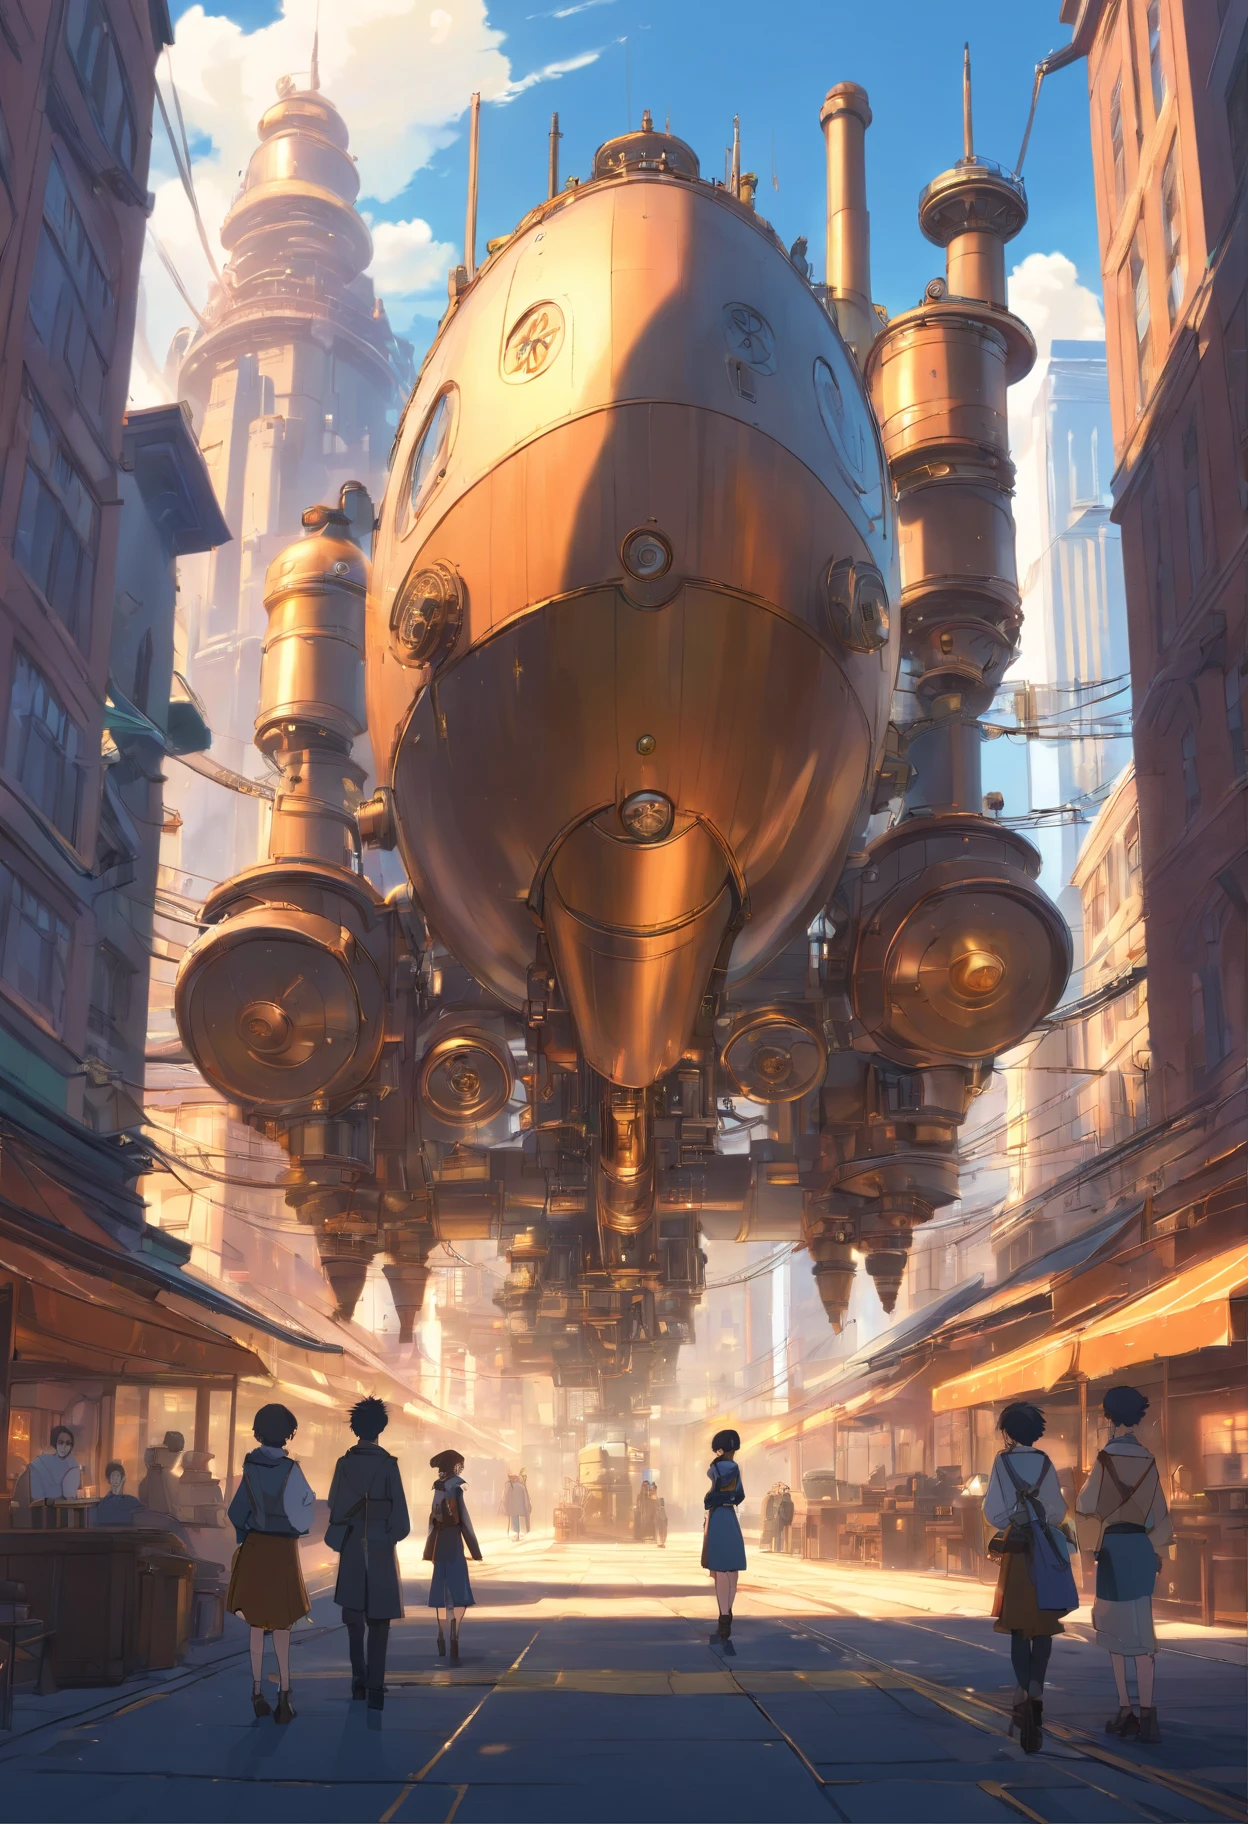 An anime scene with a giant egg-shaped airship floating above a city street. - Steampunk